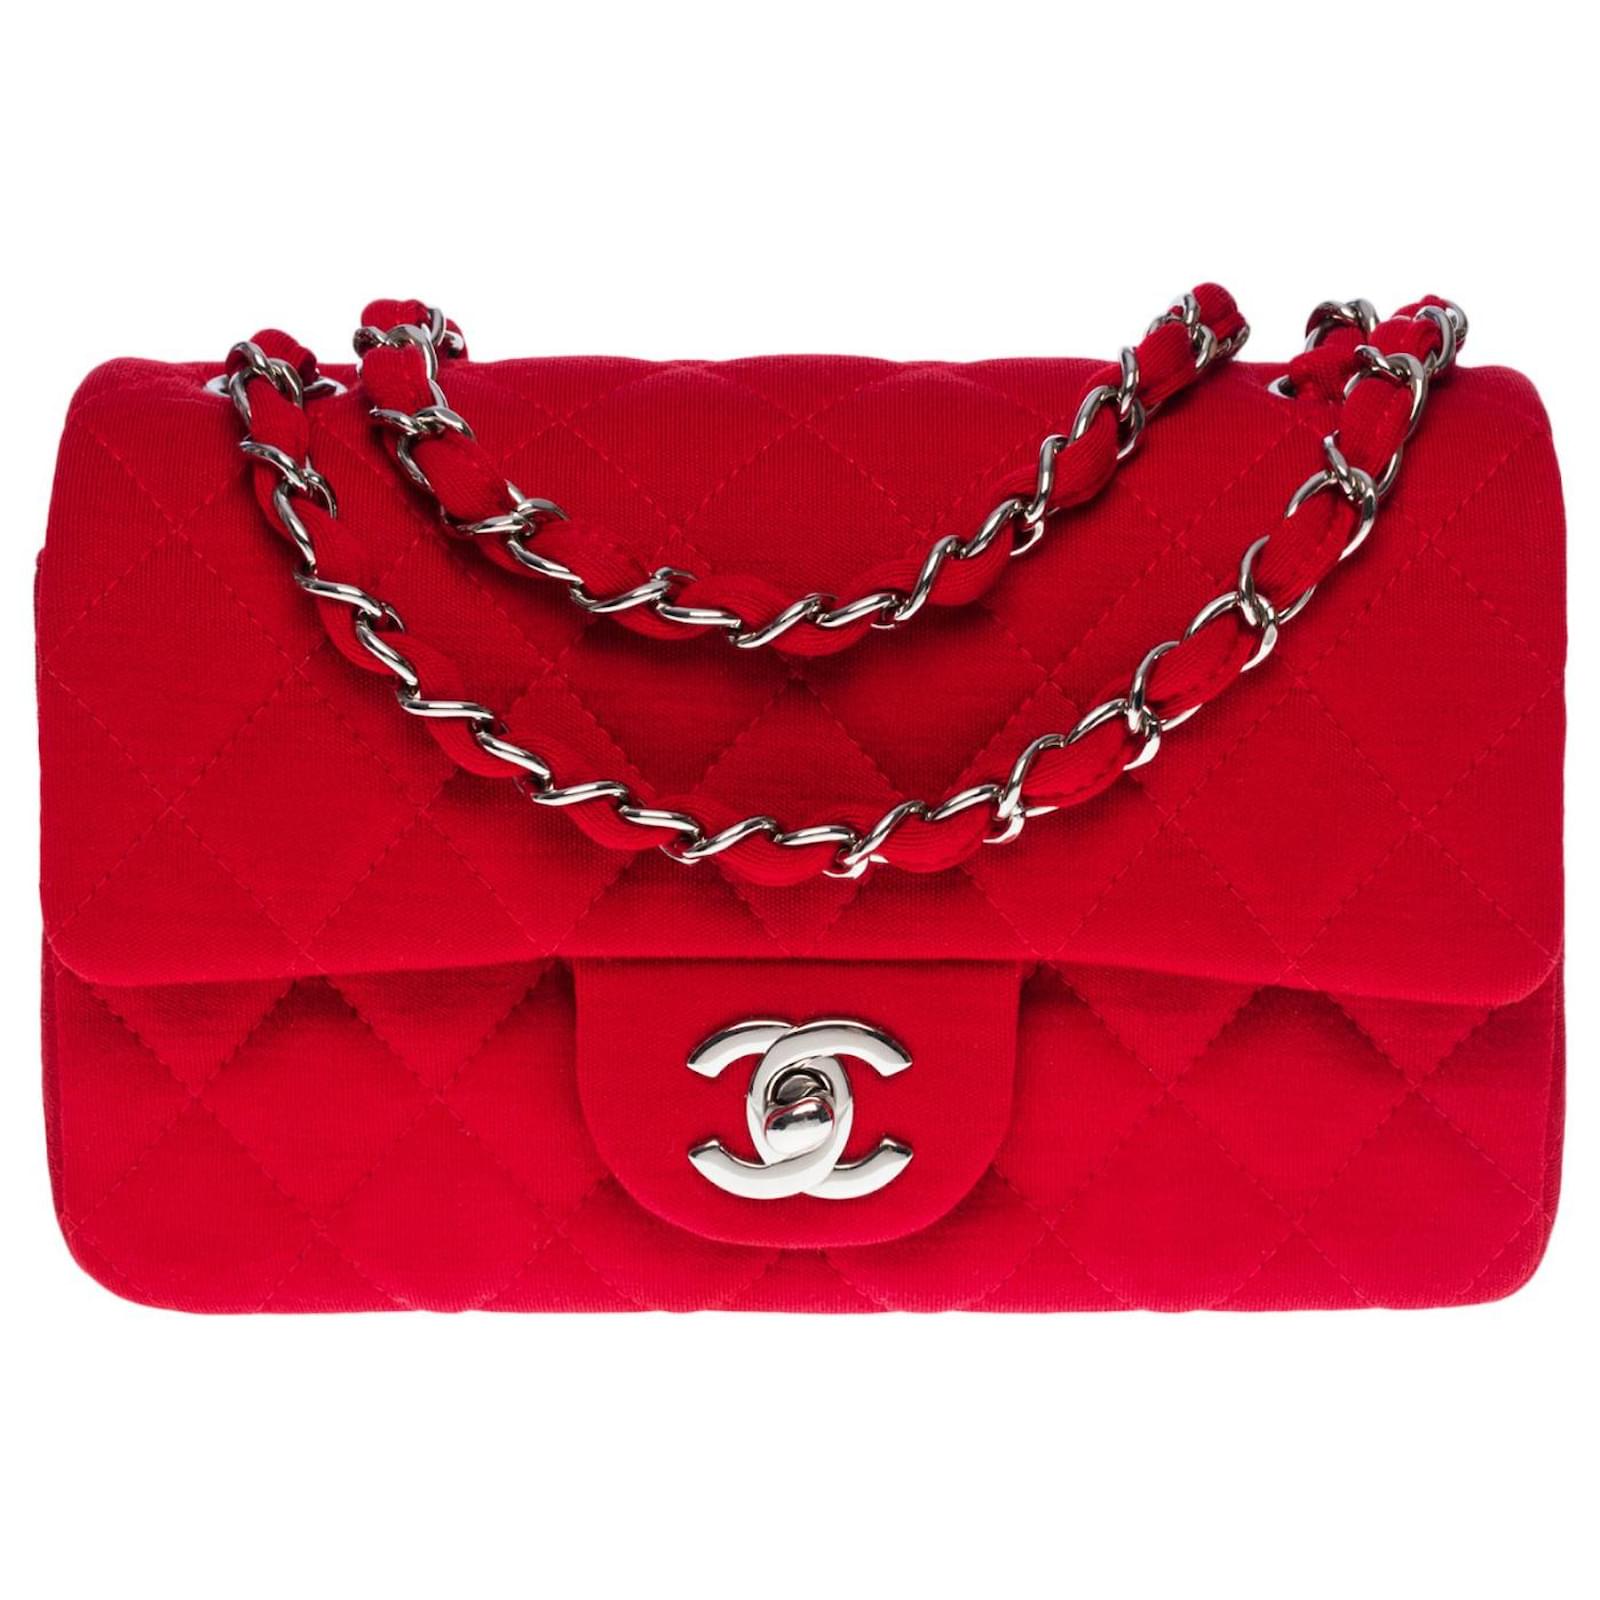 chanel jersey classic flap bag